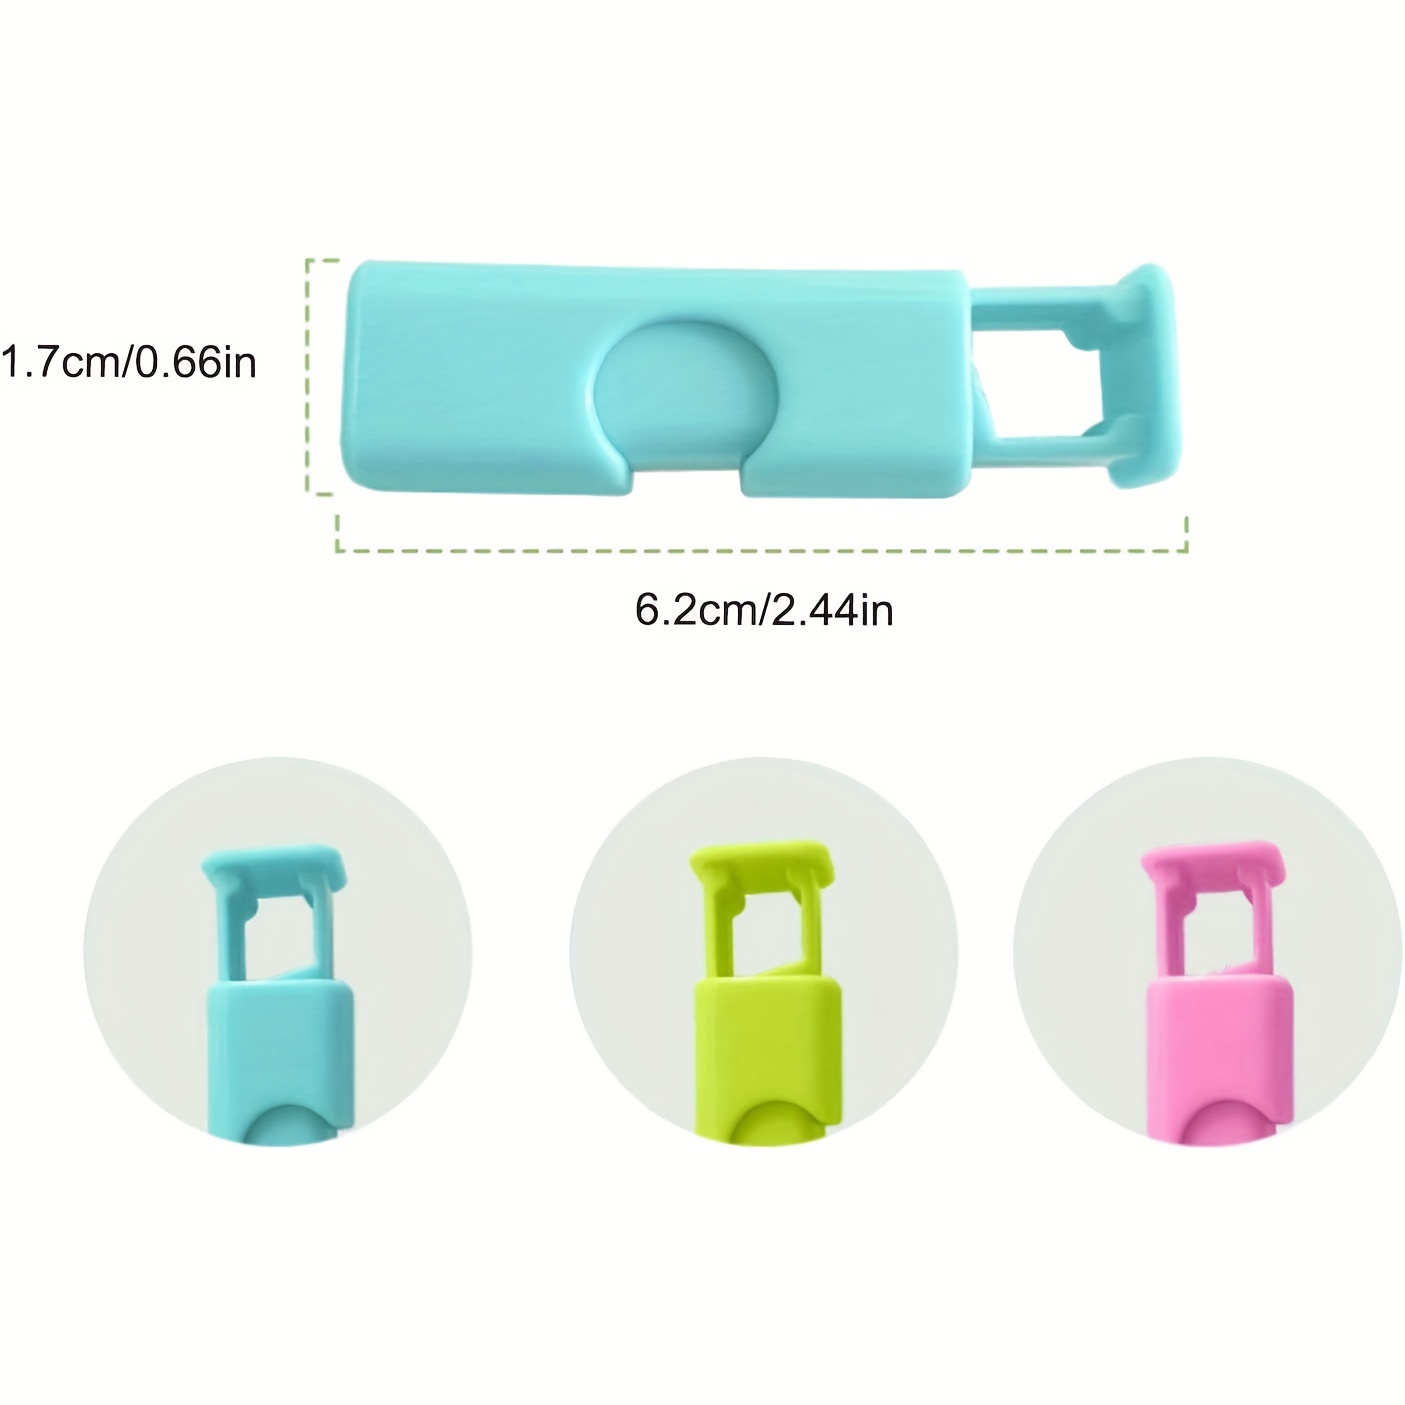 Squeeze Bread Bag Clips, Bag Cinches, Bagel Bag Clips, Slip Grip Easy  Squeeze & Lock, Assorted